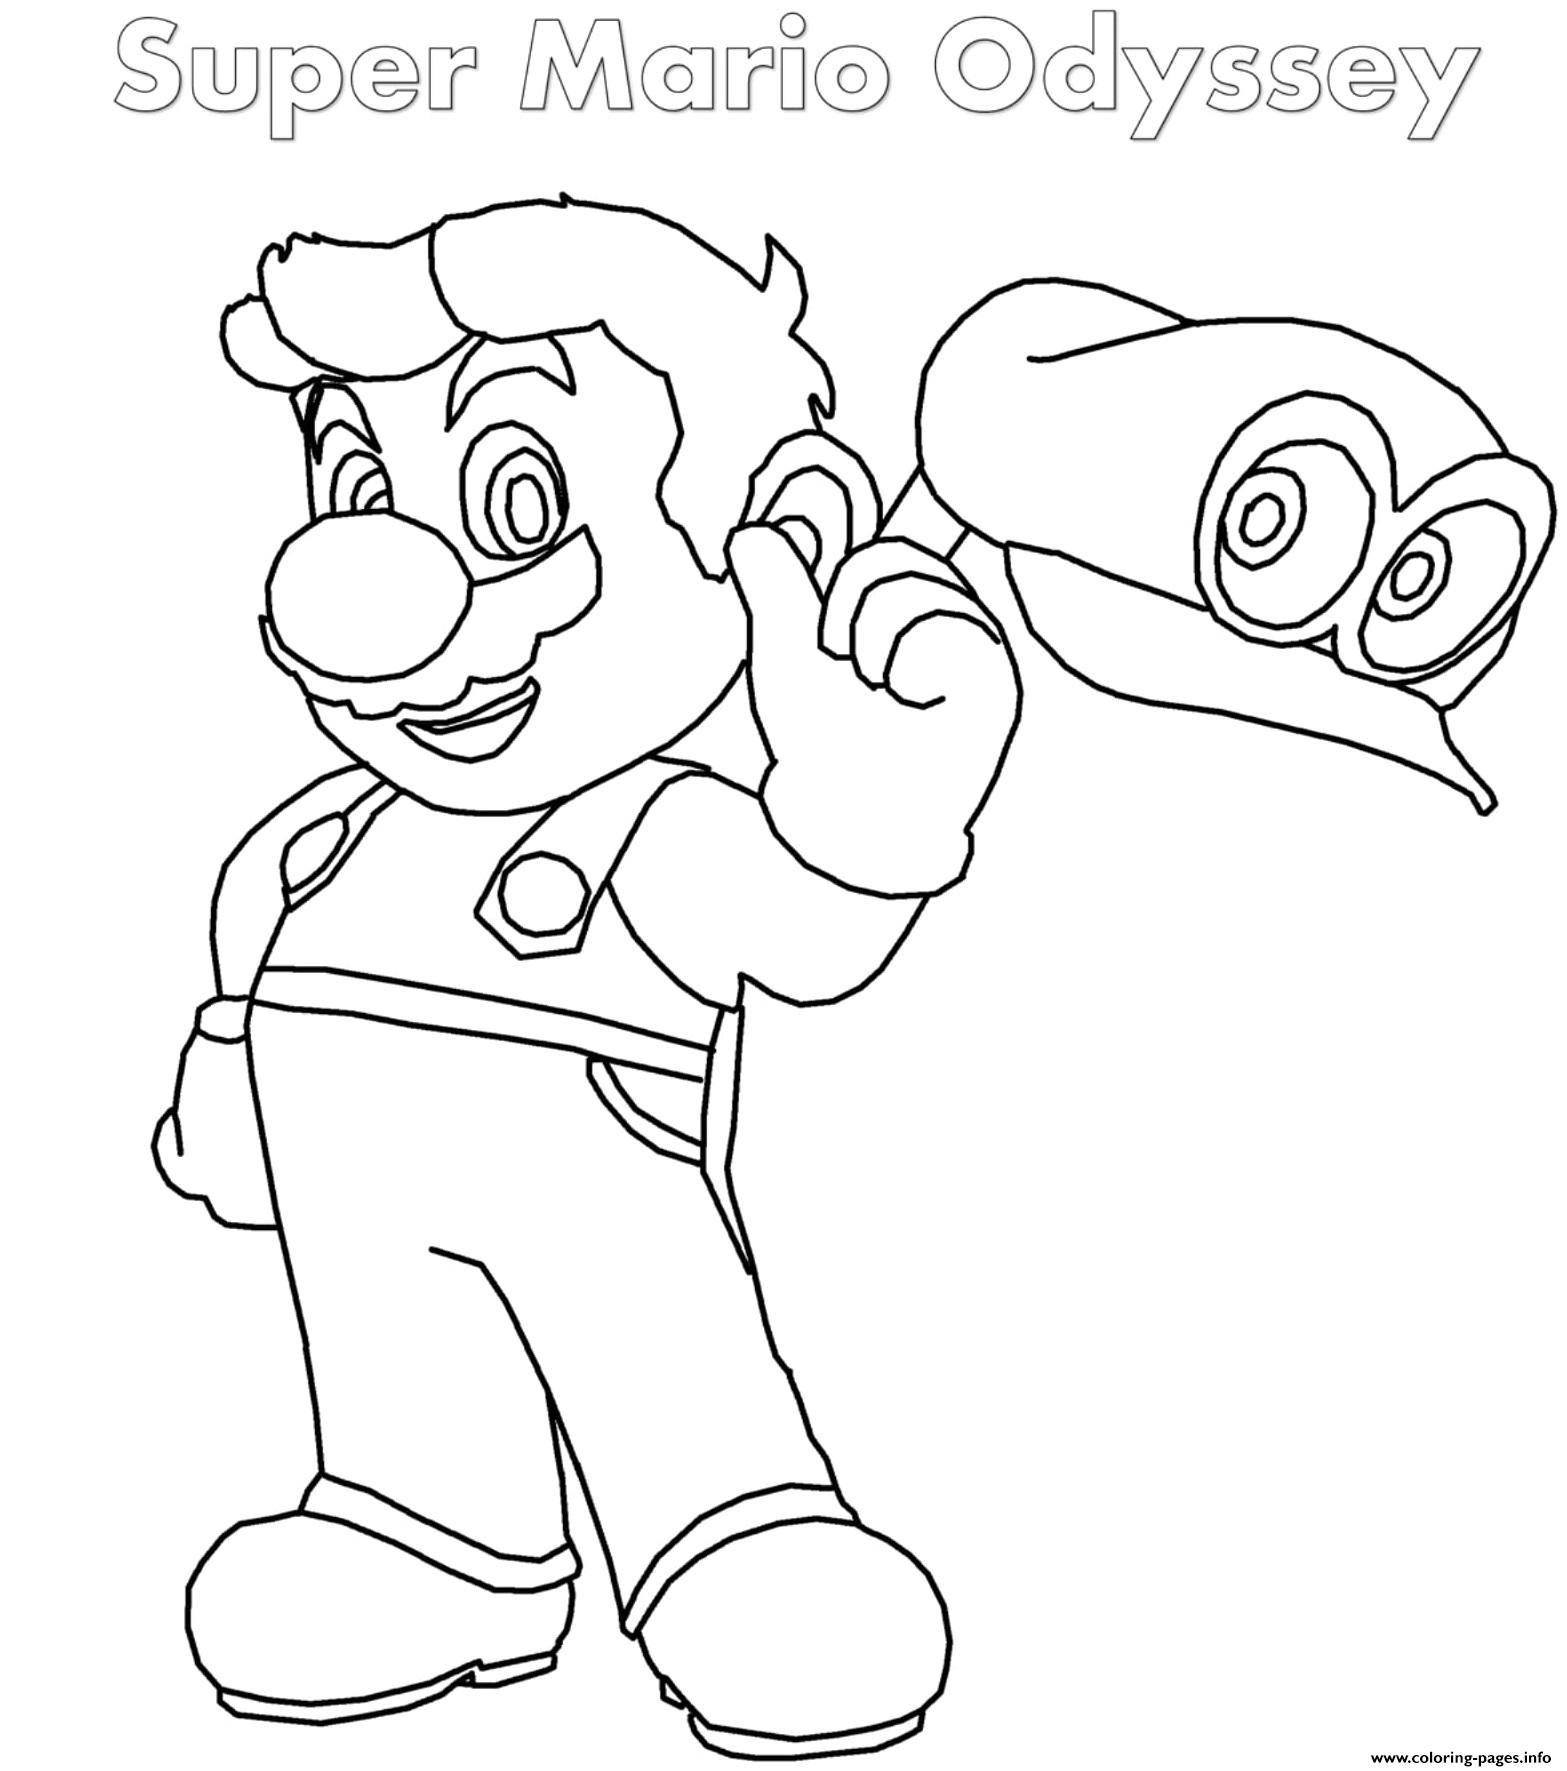 super mario odyssey coloring pages printable coloring home